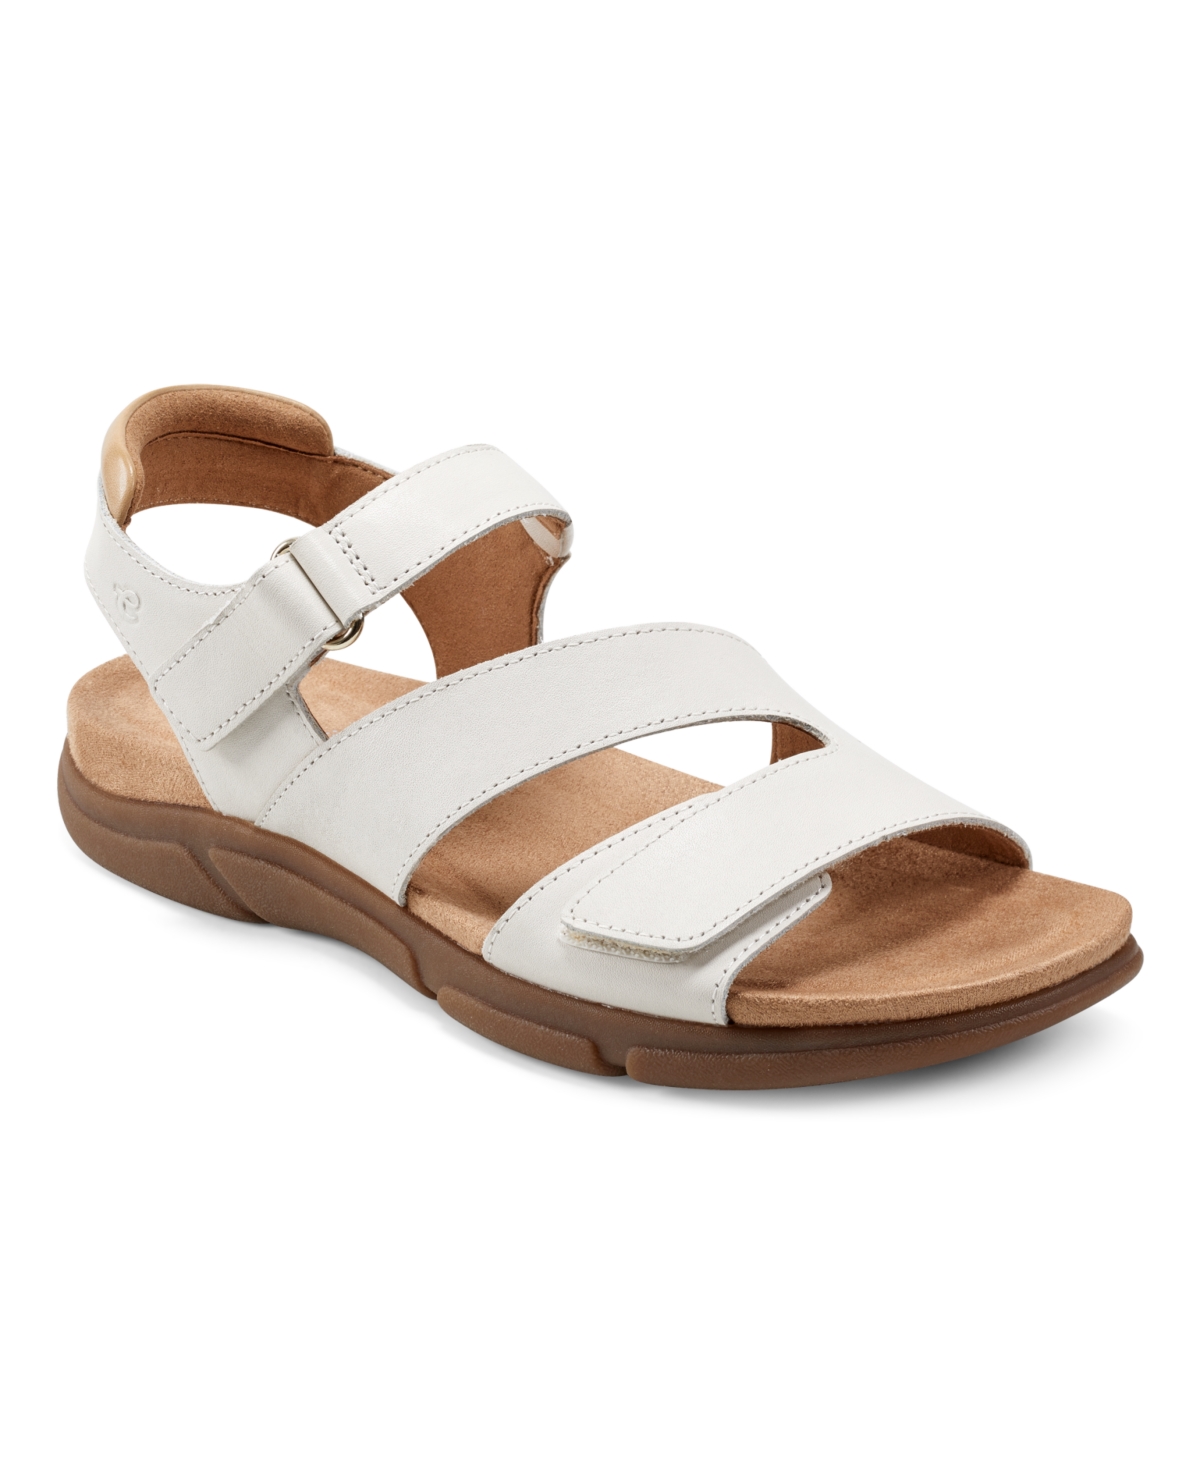 Women's Mavey Round Toe Strappy Casual Sandals - Medium Brown Leather